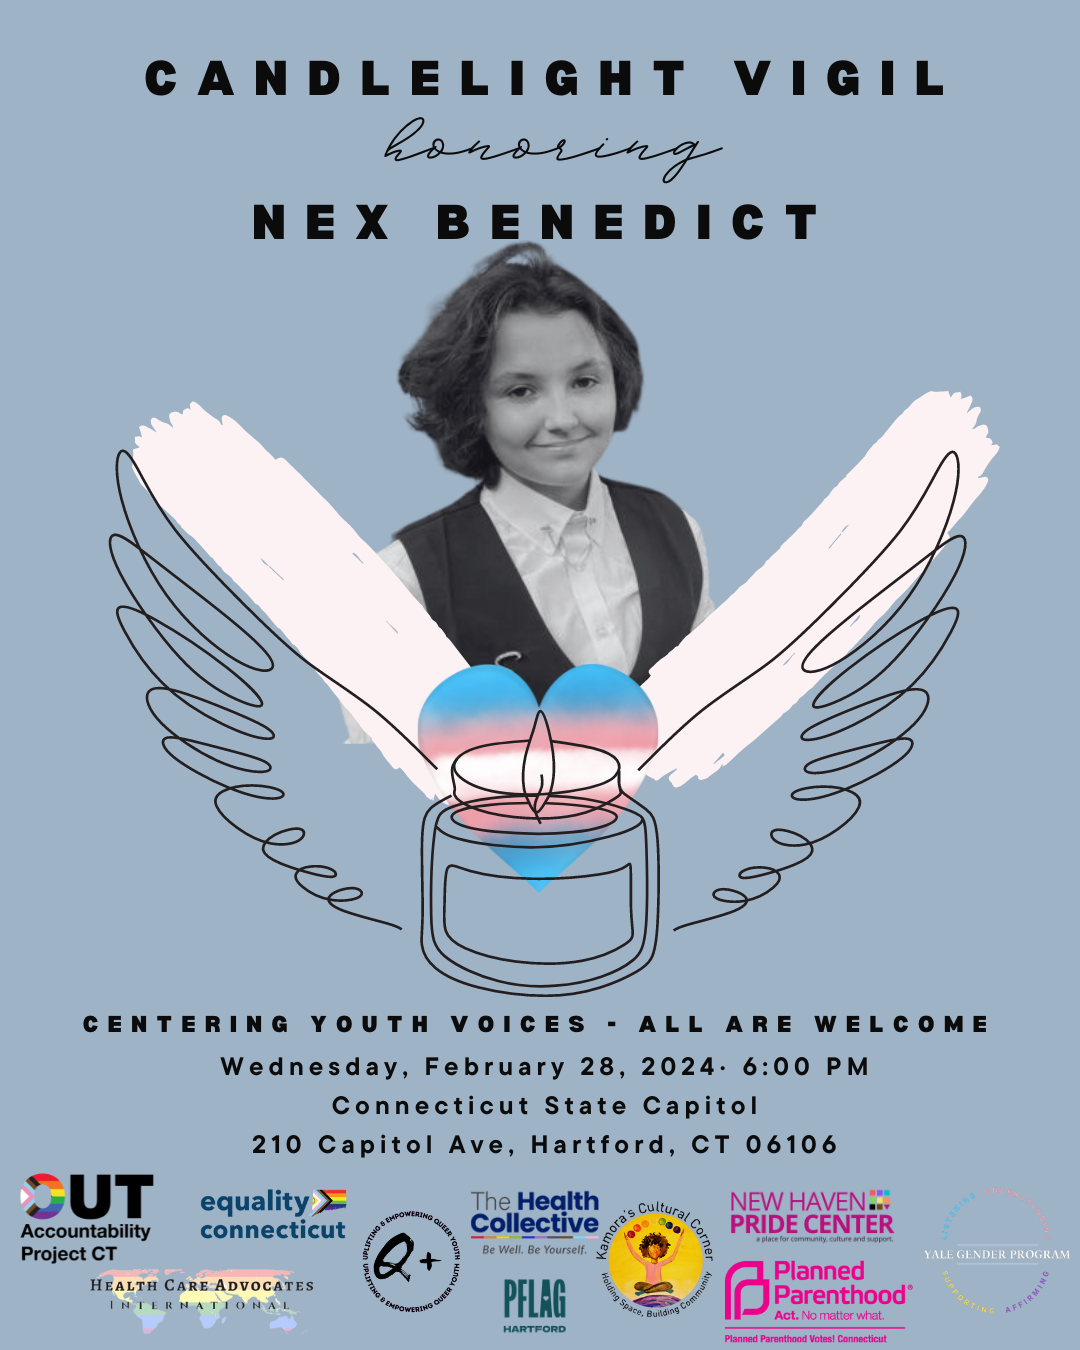 A vigil and press conference will be held on February 28 to remember Nex Benedict. 